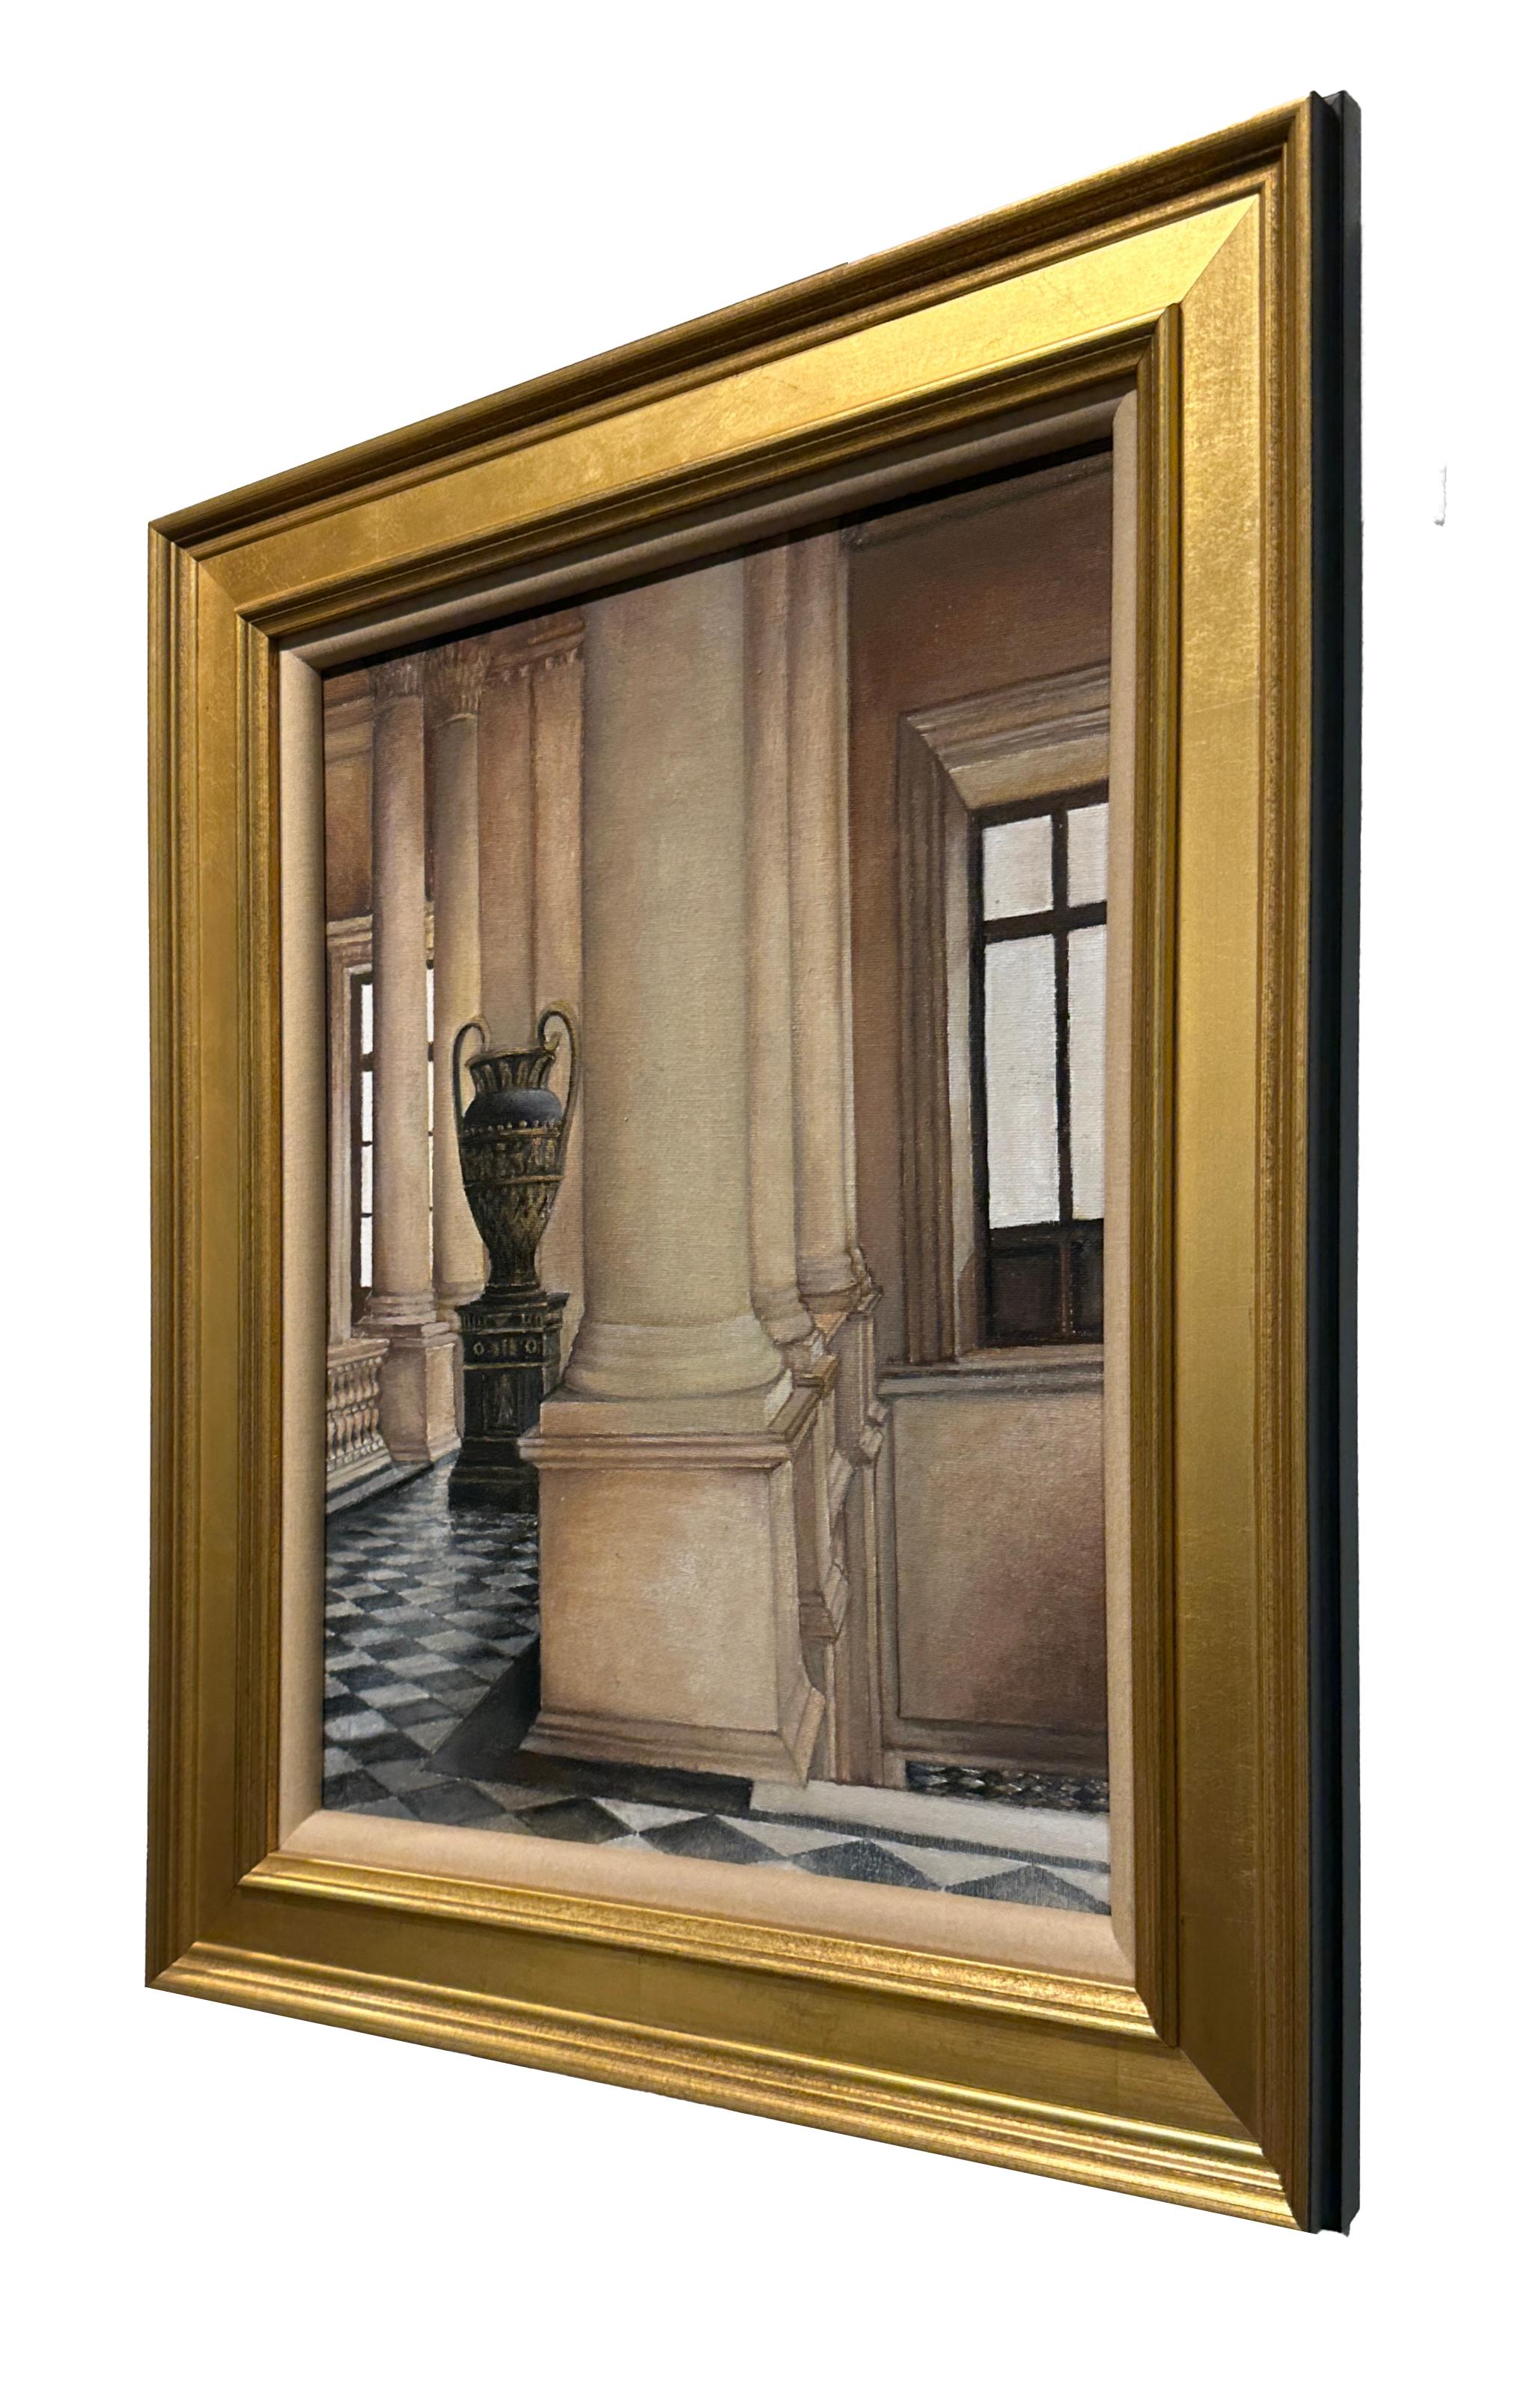 Interiors have always intrigued painter/architect Richard Gibbons and the Louvre provides ample areas of interest for just such an artist.  Here, the simplicity of design is evident in creating an extraordinary environment.  Painted on a canvas,